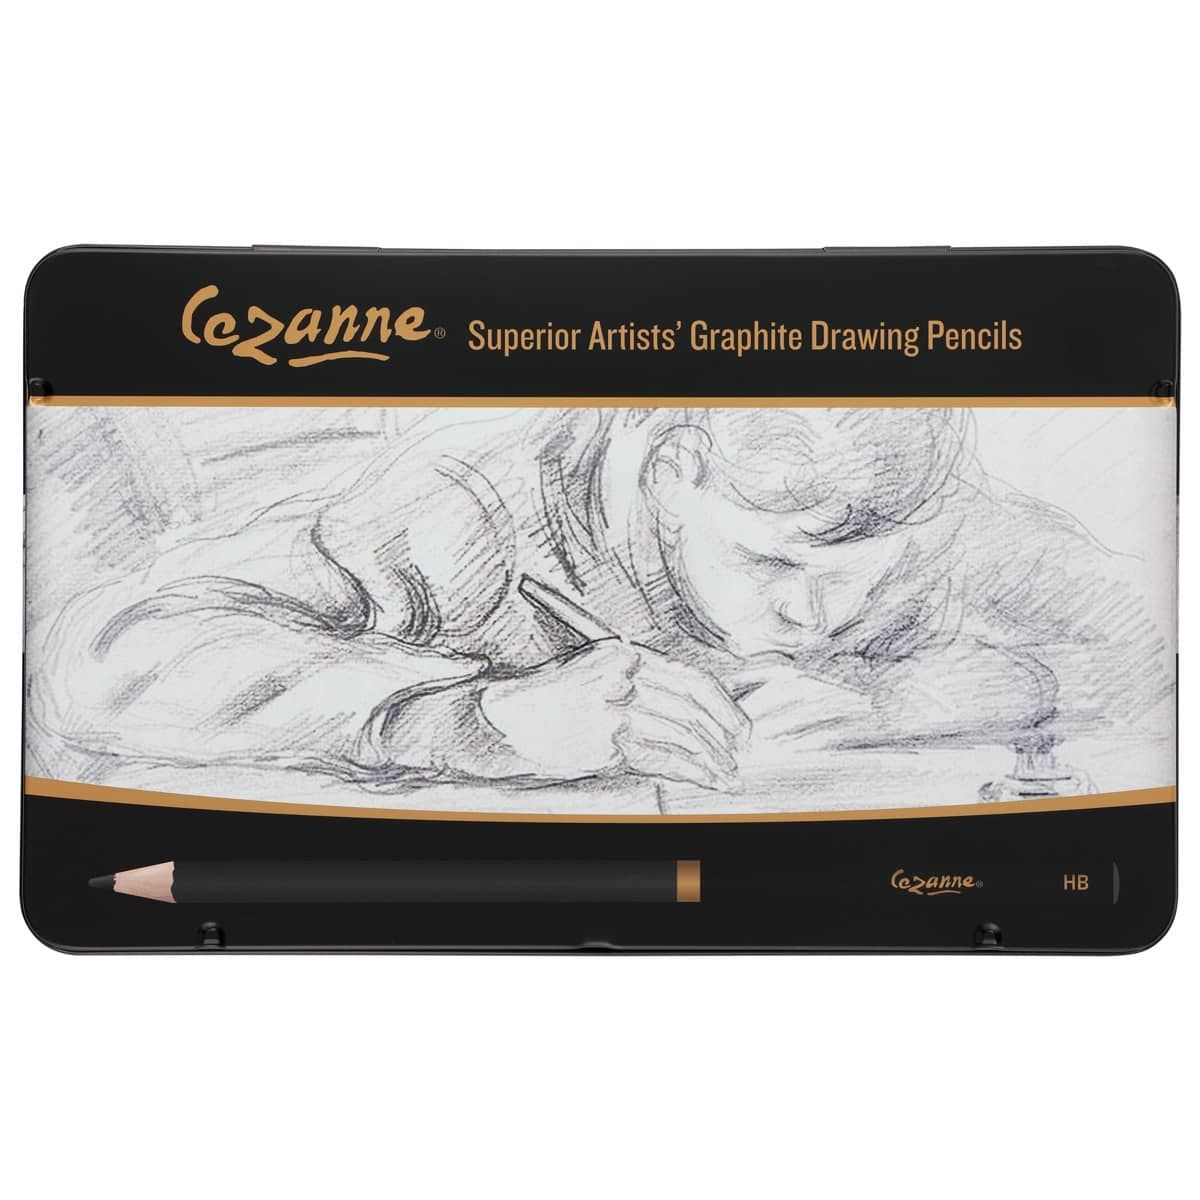 Cezanne® Graphite Drawing Pencils are made with high-quality graphite lead 